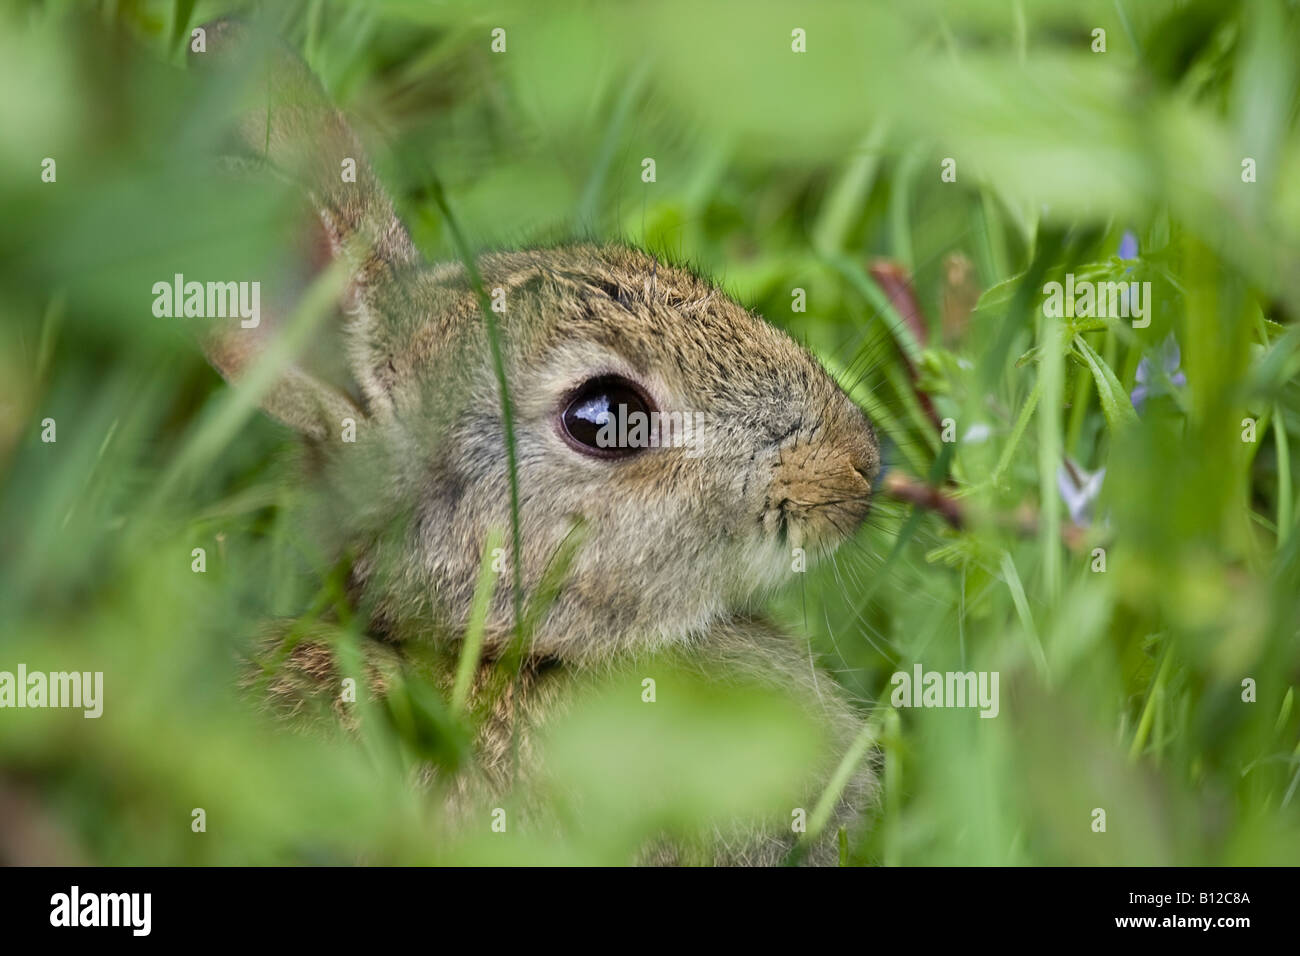 Close up of a wild European baby rabbit (Oryctolagus cunniculus) hidden in long grass. West Sussex, England. Stock Photo